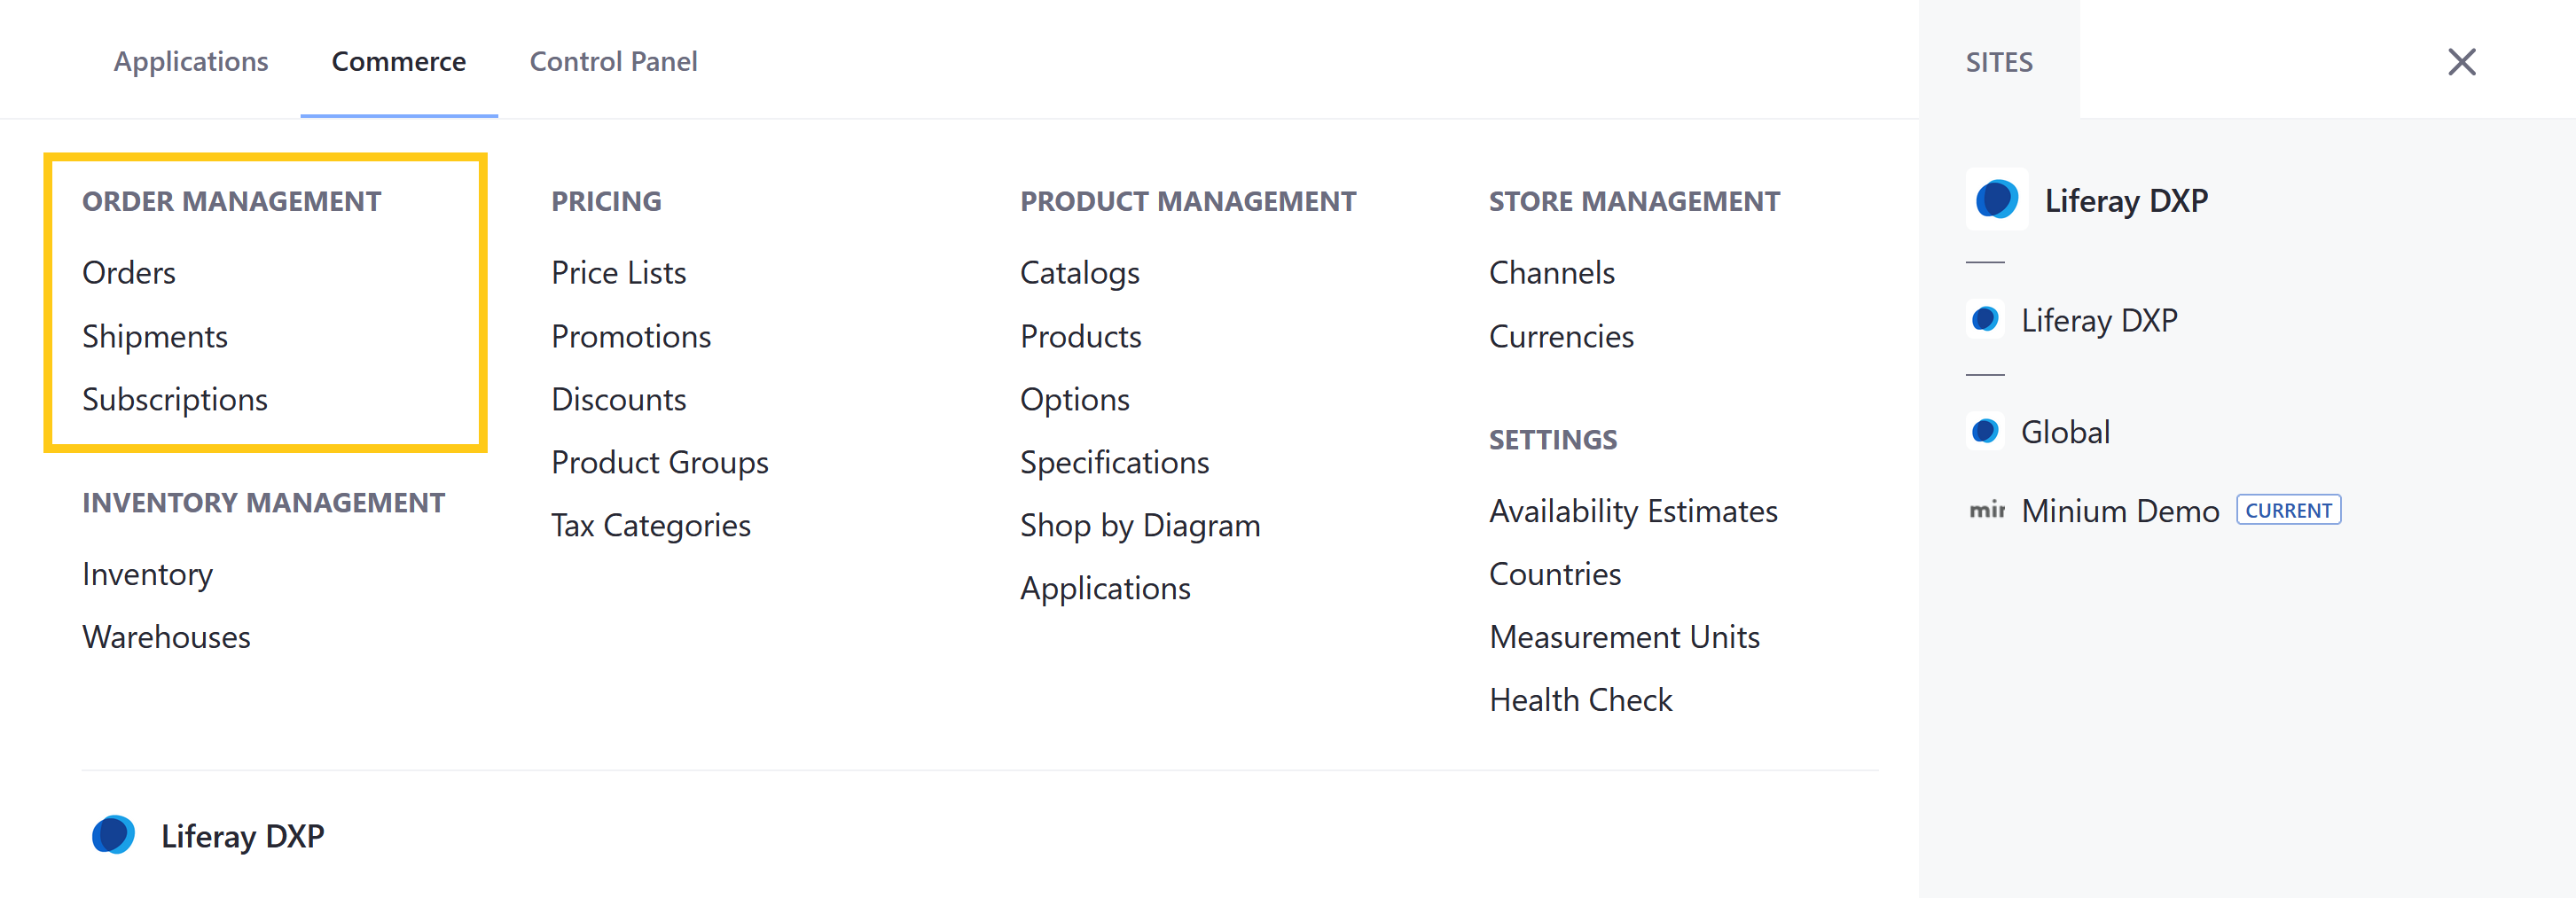 Control access to Order Management applications and resources.